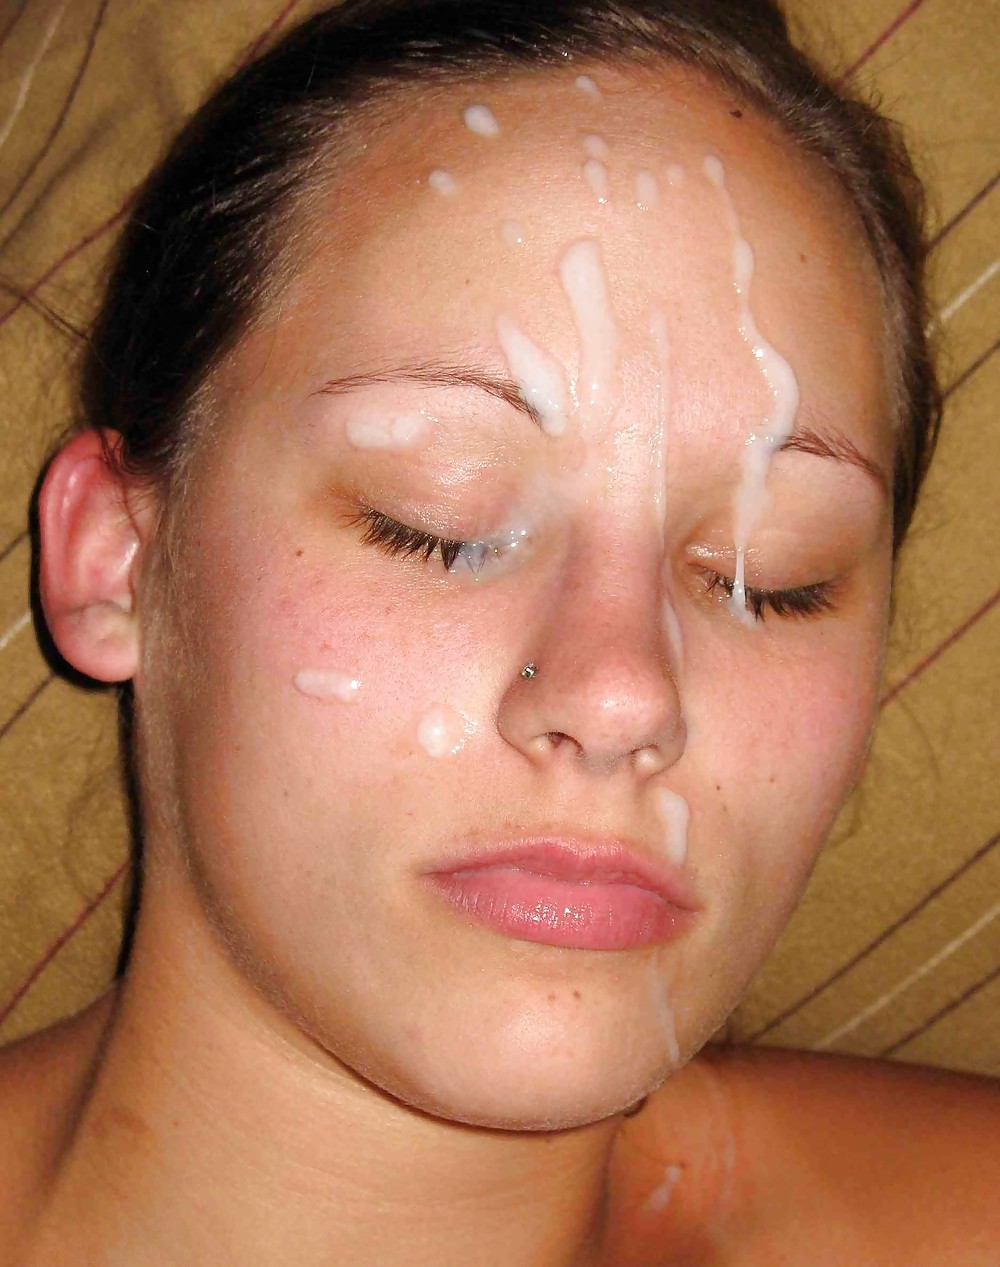 Porn image Great collection. sperm on her face